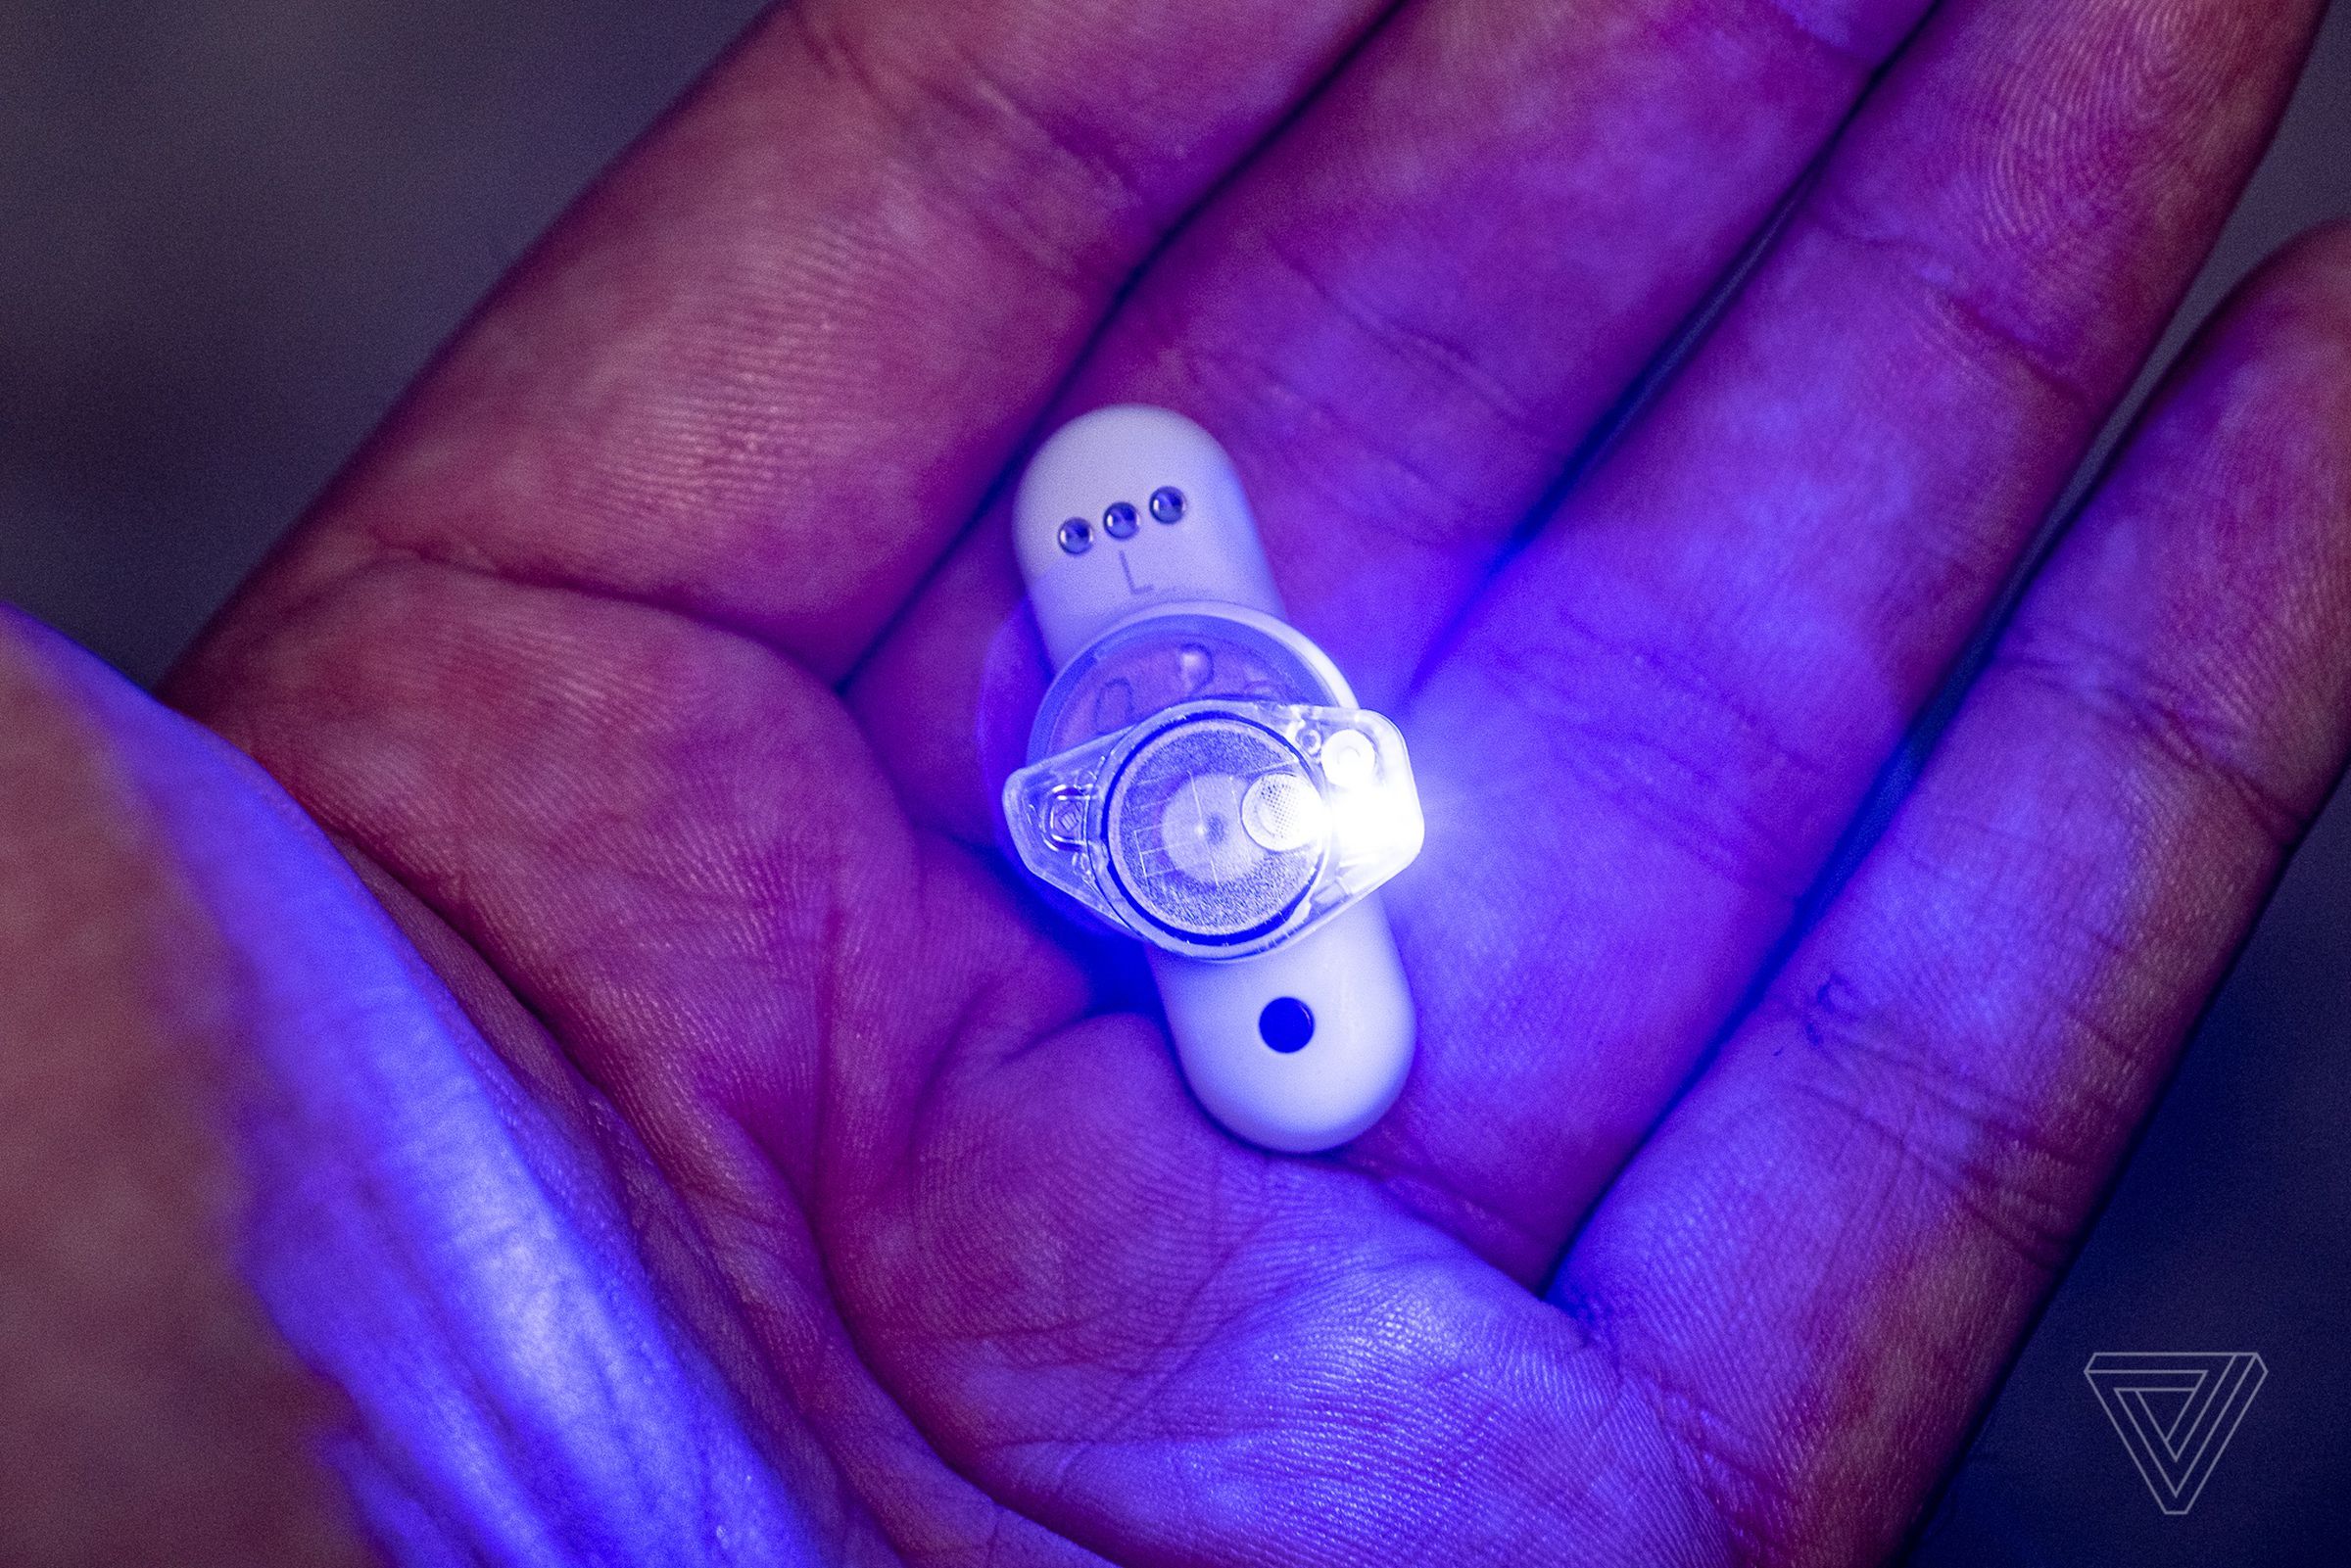 The secret to the mold process is science. And these built-in LEDs.